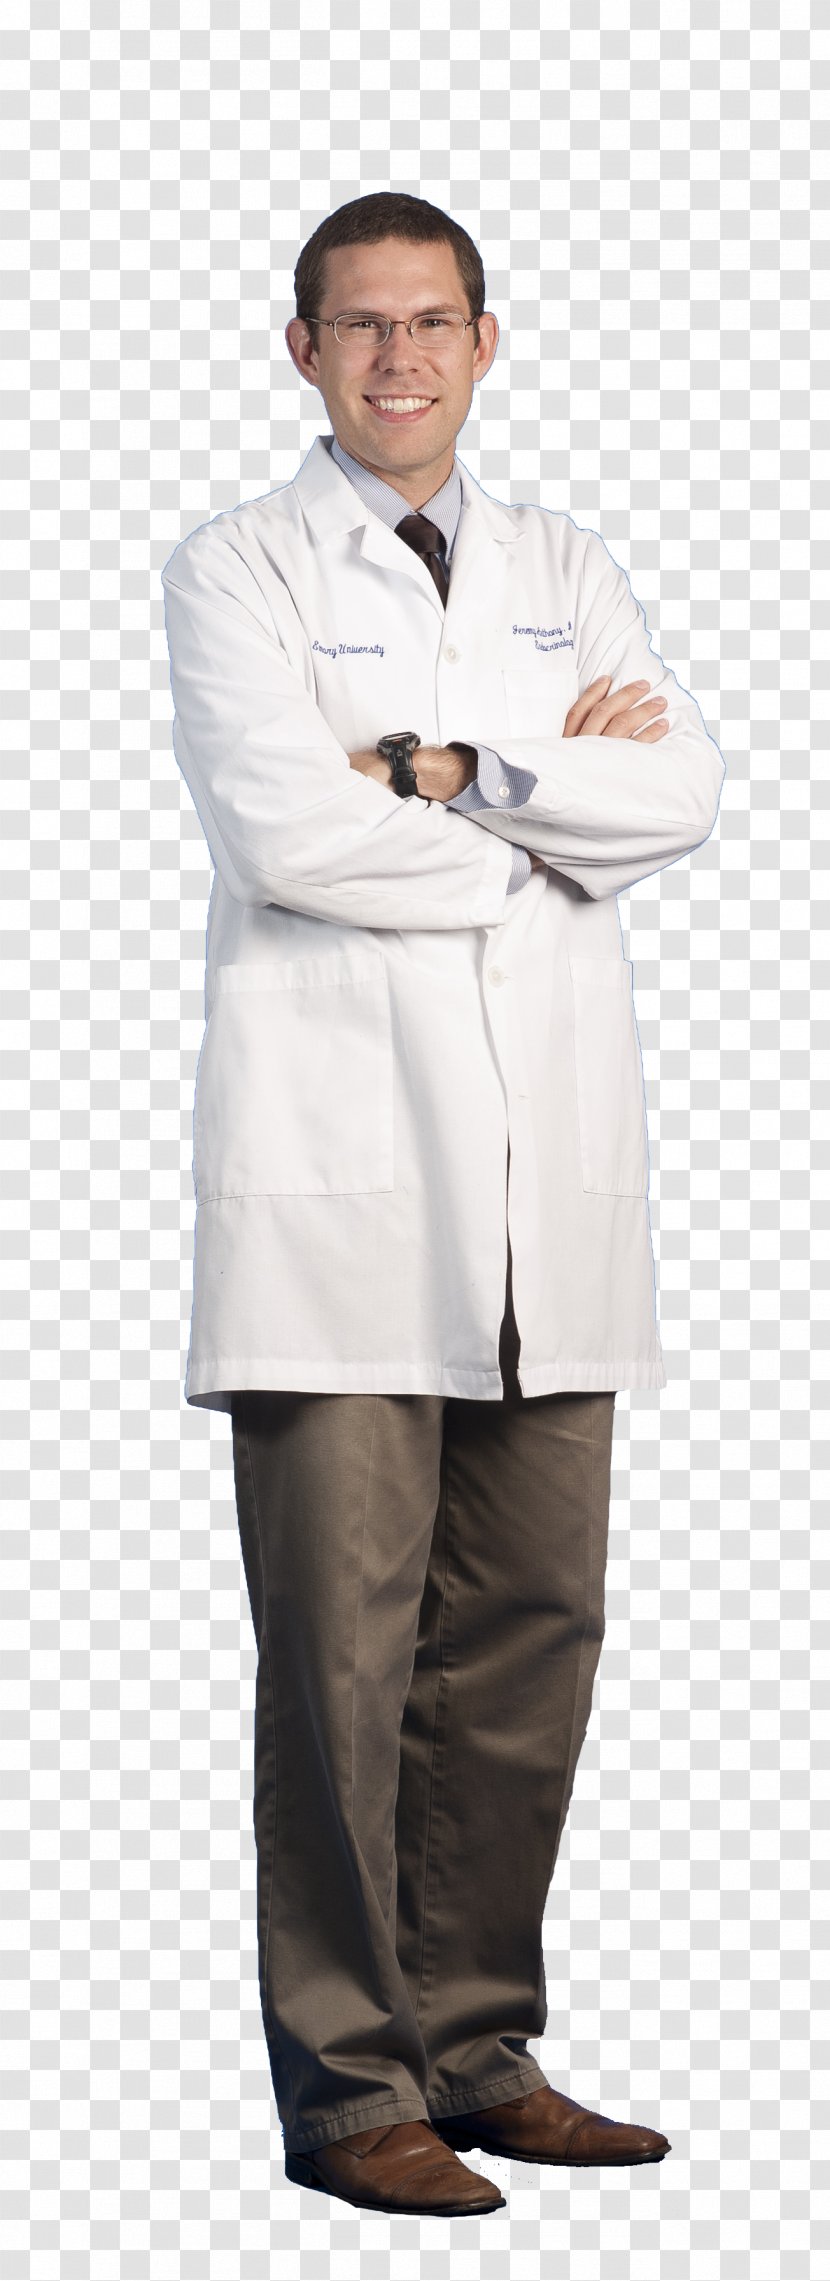 Sleeve Chef's Uniform Lab Coats Outerwear - Neck - Disturbance Of Flies While Standing Transparent PNG